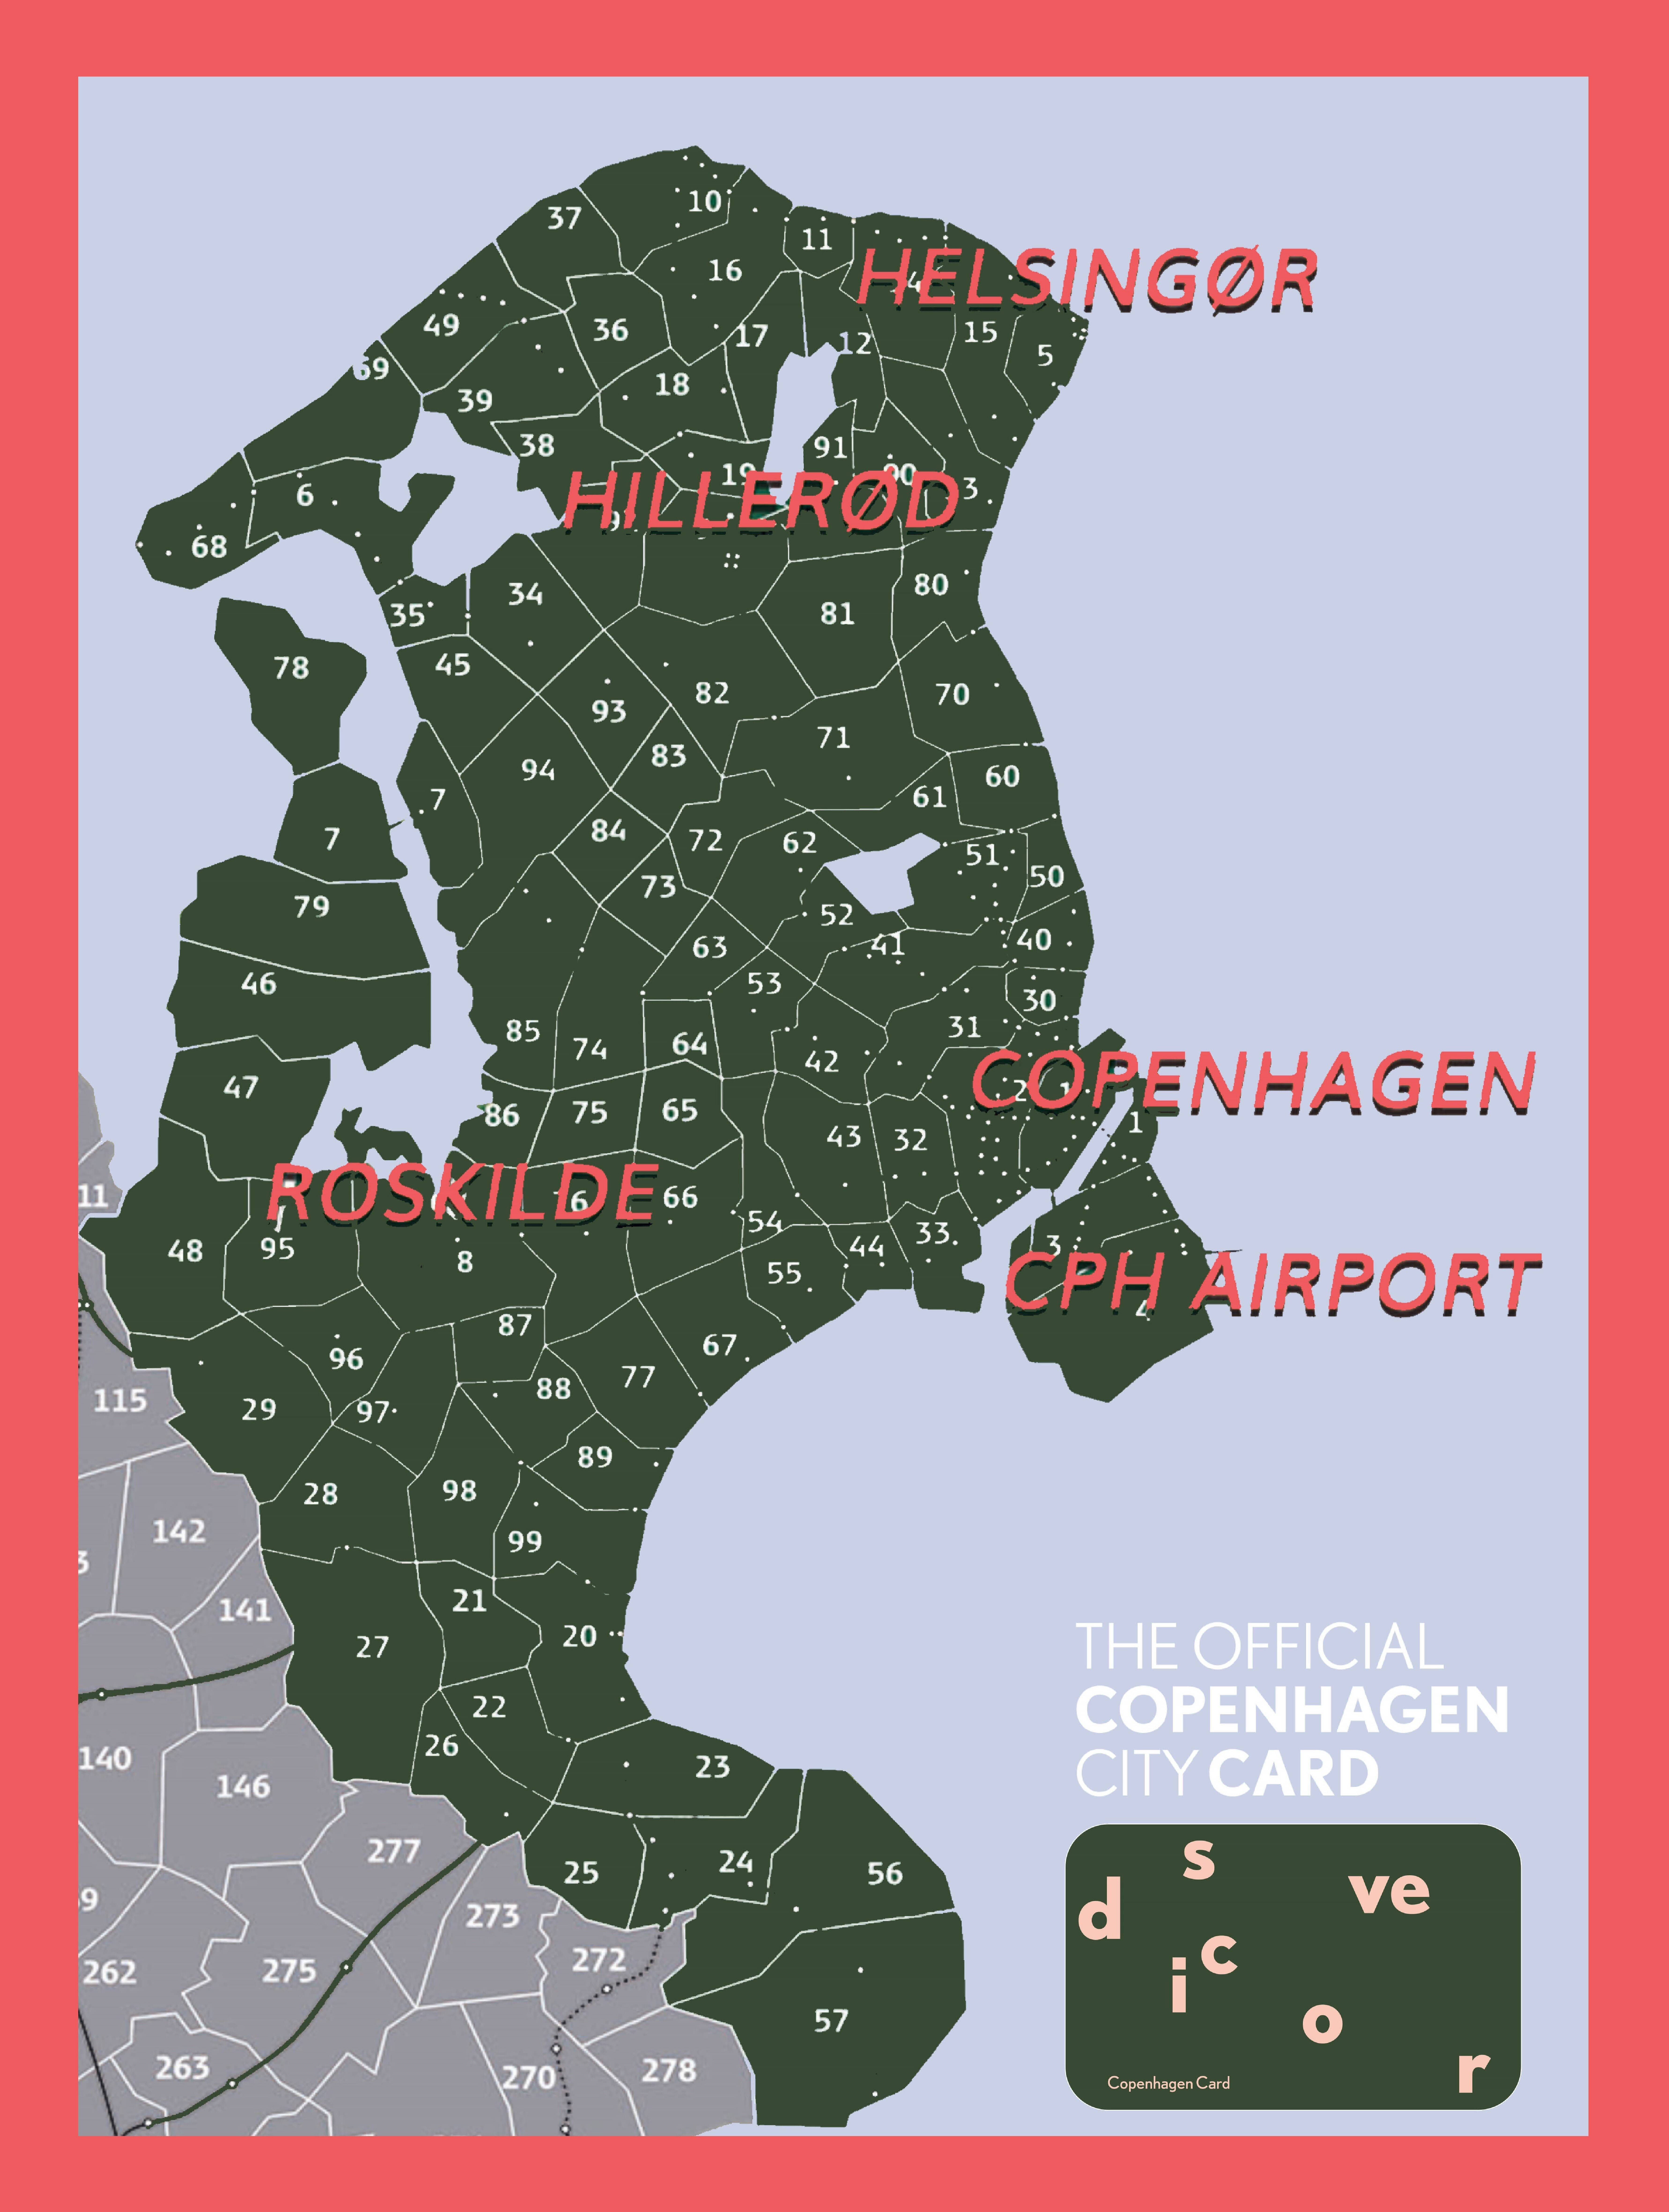 Area of coverage with Copenhagen Card Discover